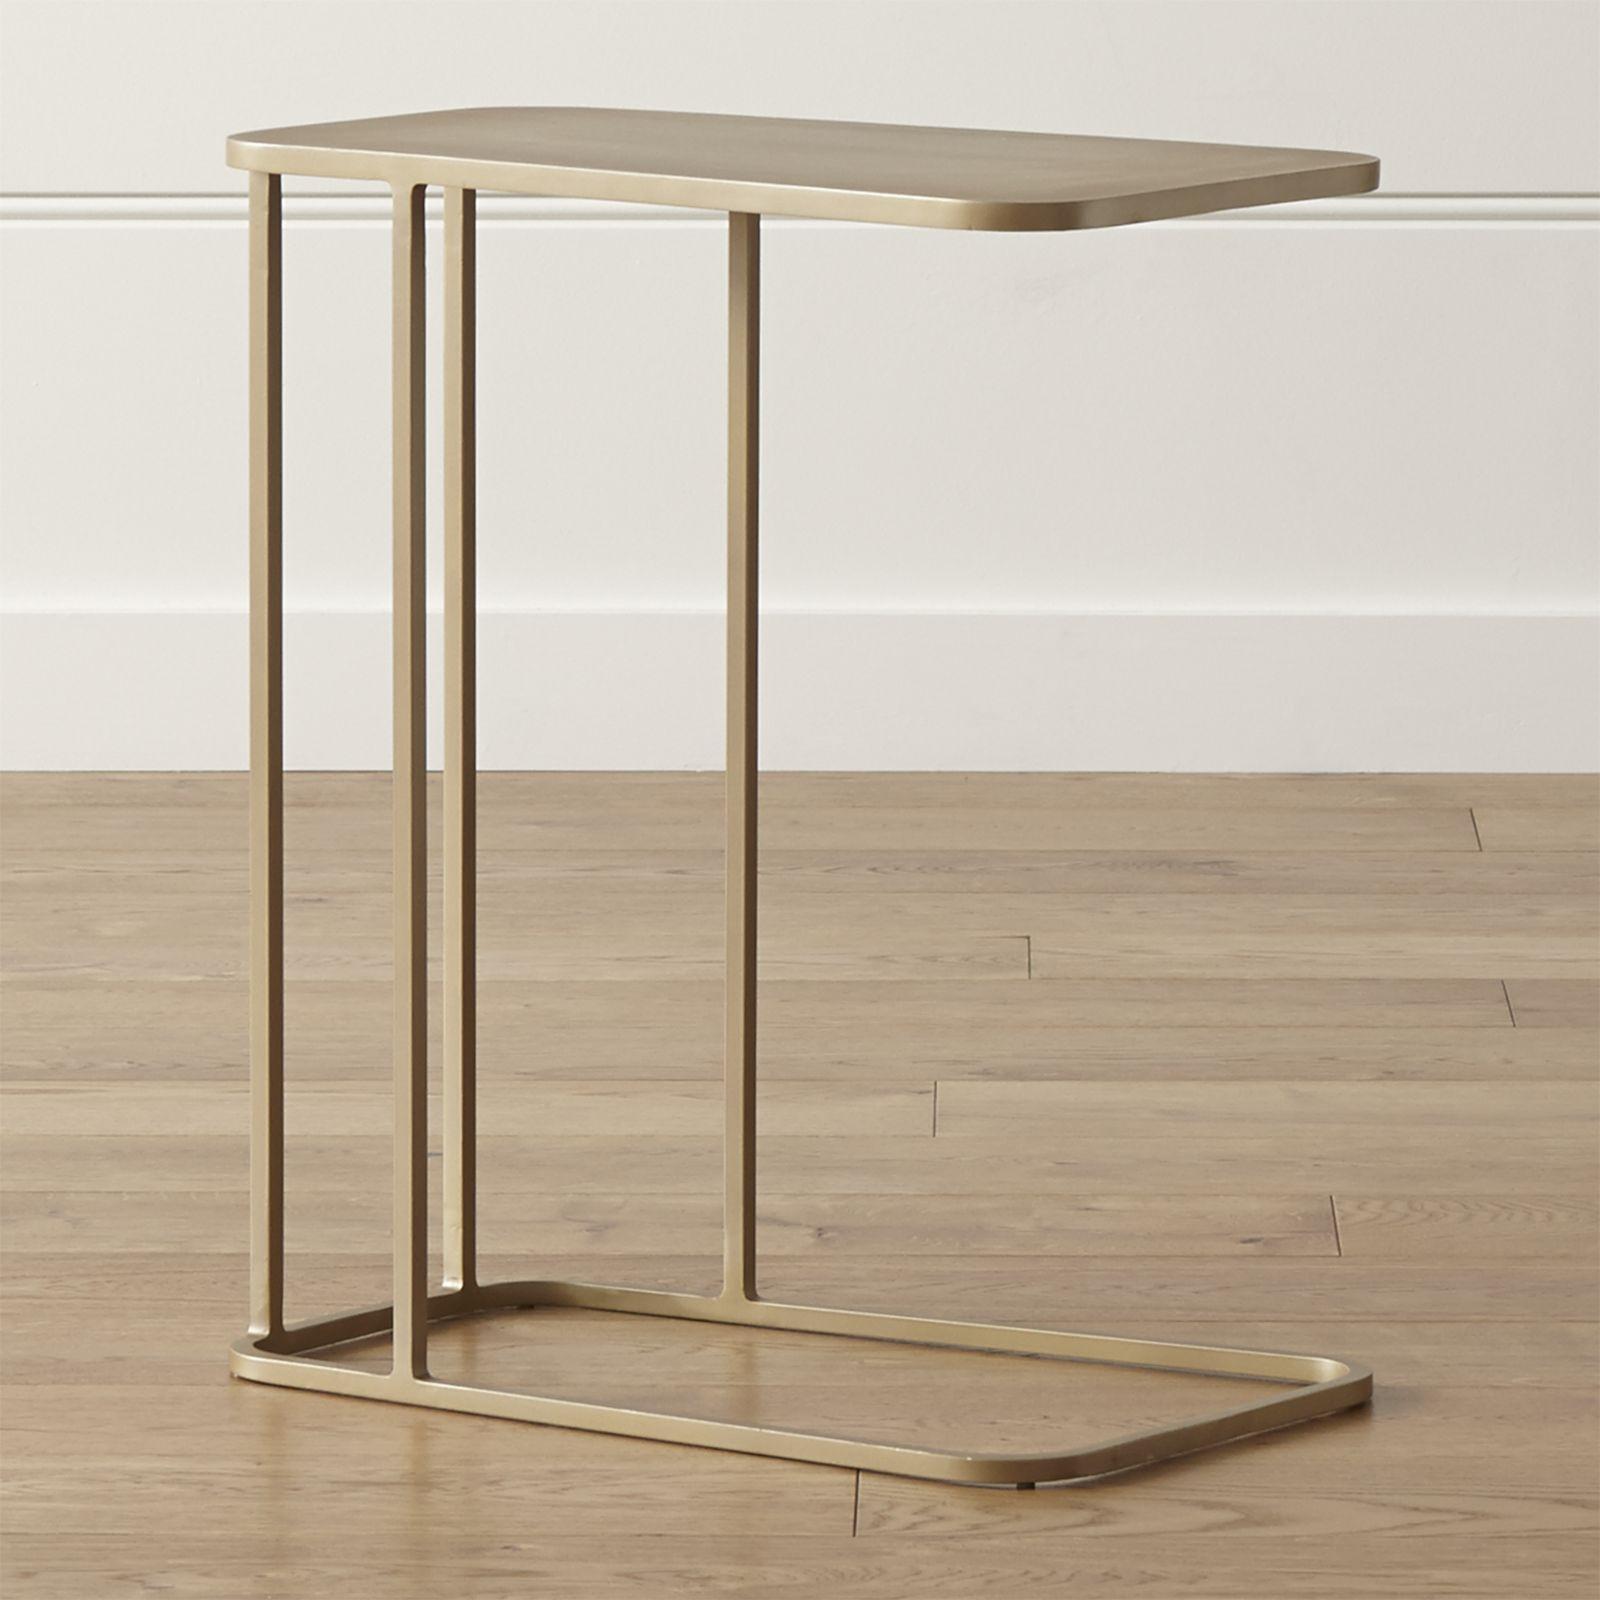 Crate And Barrel Siena C Table Zola